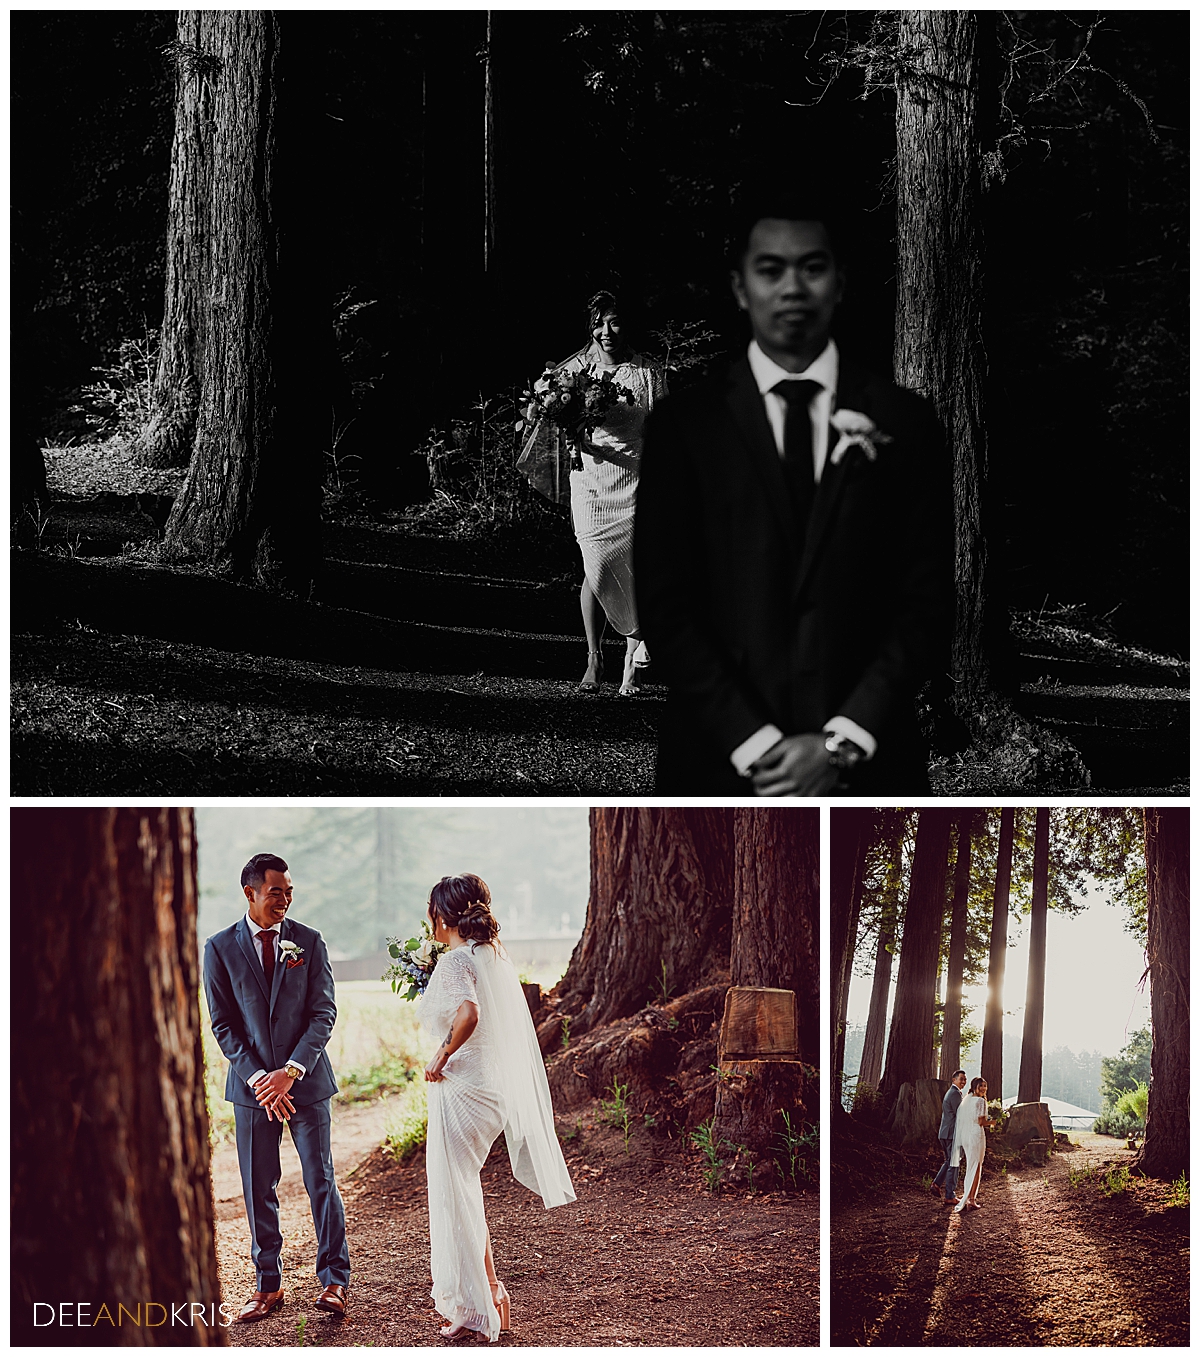 Three images: top black and white image of bride approaching groom from behind. Bottom left image of groom turning around to see his bride. Bottom right image of bride and groom looking back at camera walking through redwood trees,